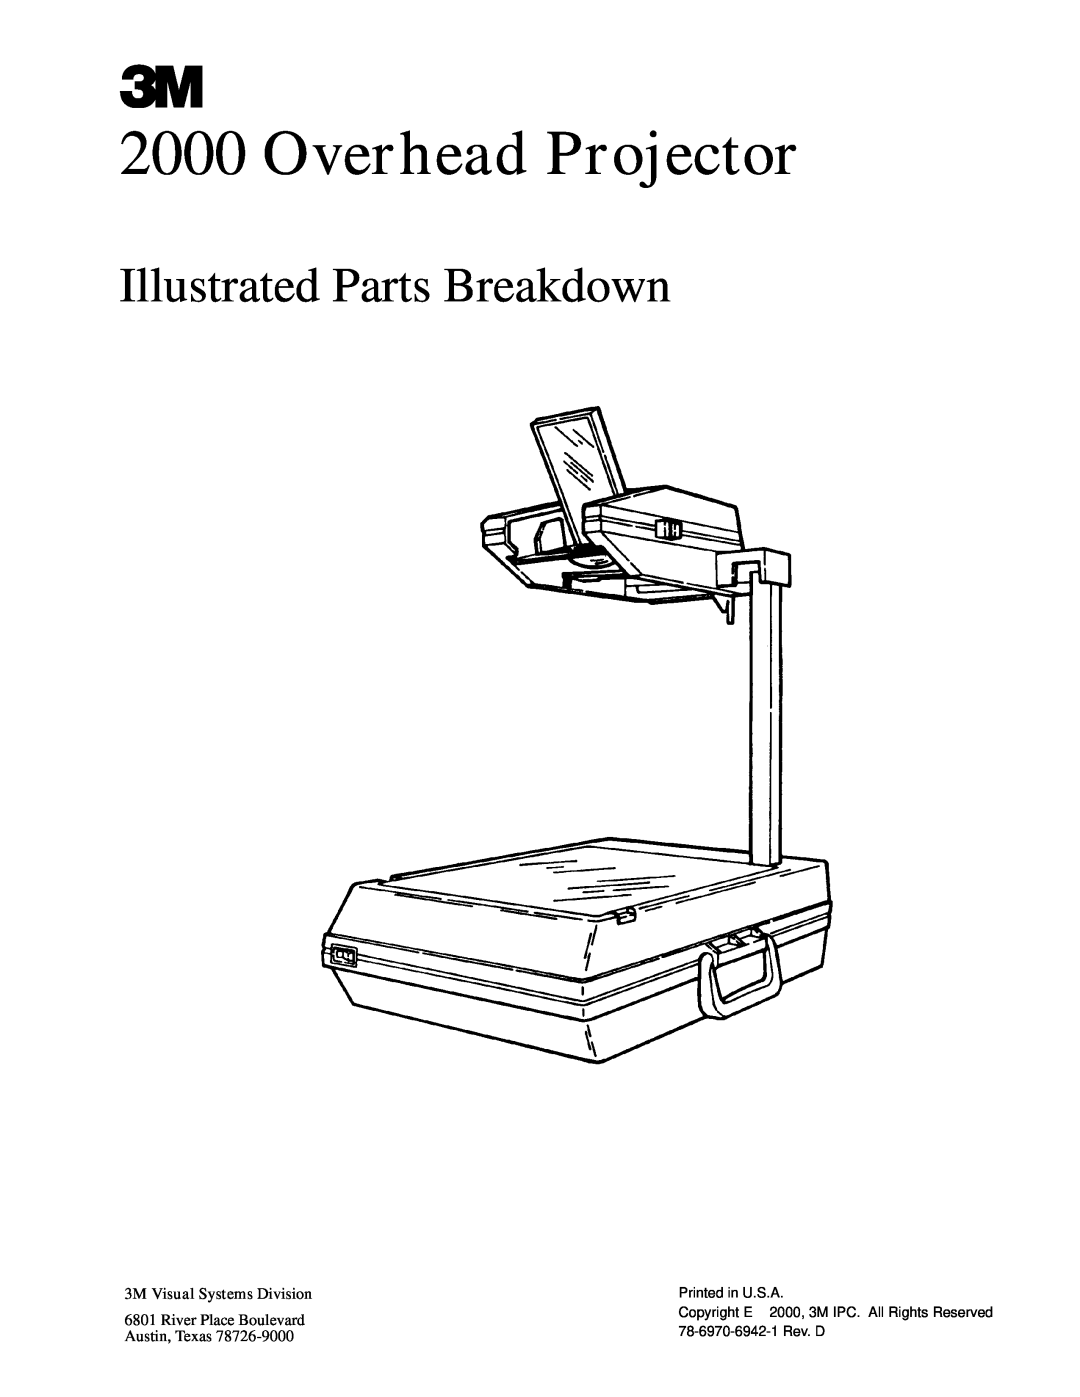 3M 2000 manual Overhead Projector, Illustrated Parts Breakdown, 3M Visual Systems Division, River Place Boulevard 